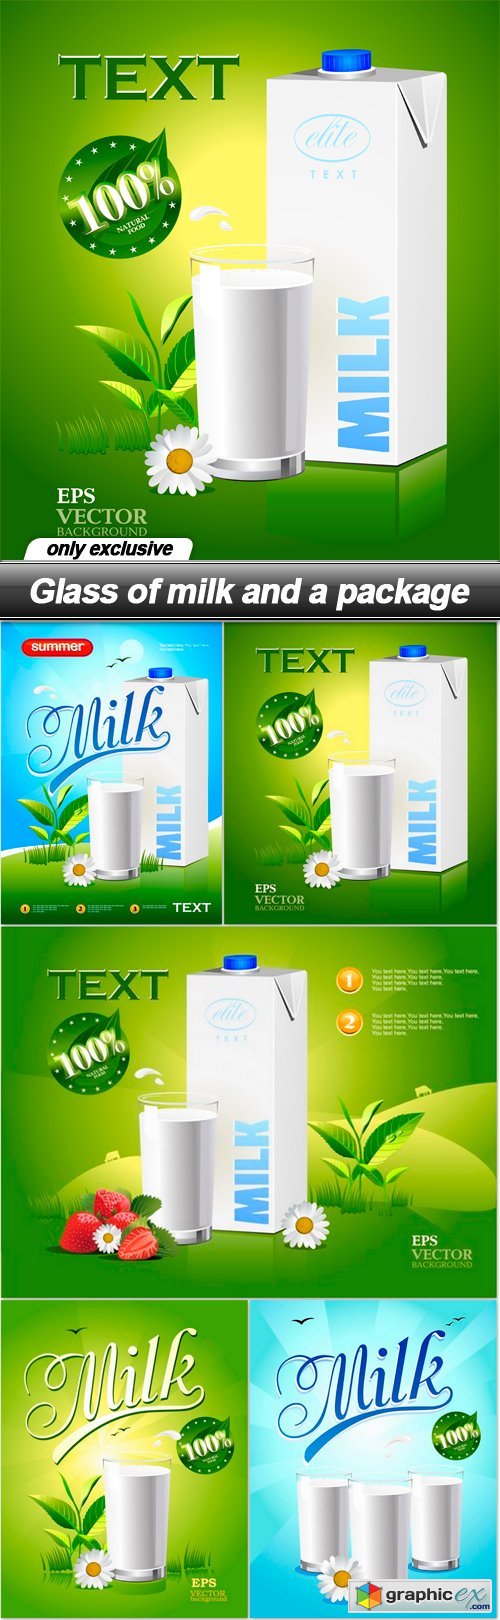 Glass of milk and a package - 5 EPS